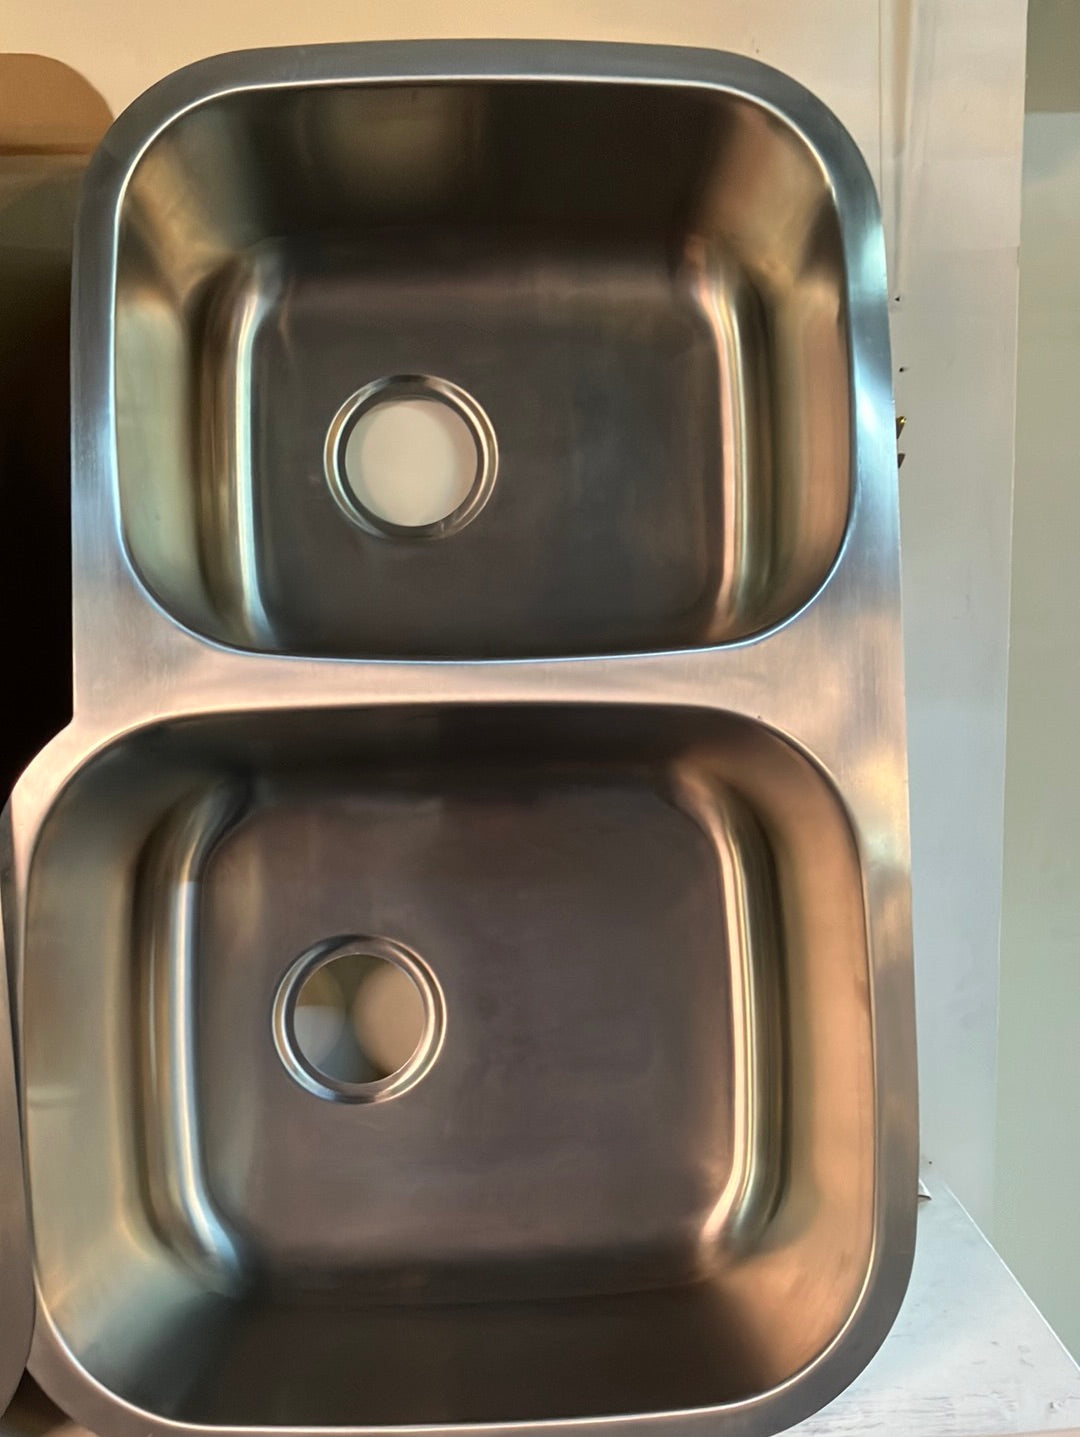 L AND J STAINLESS STEEL UNDERMOUNT SINK X 8.5